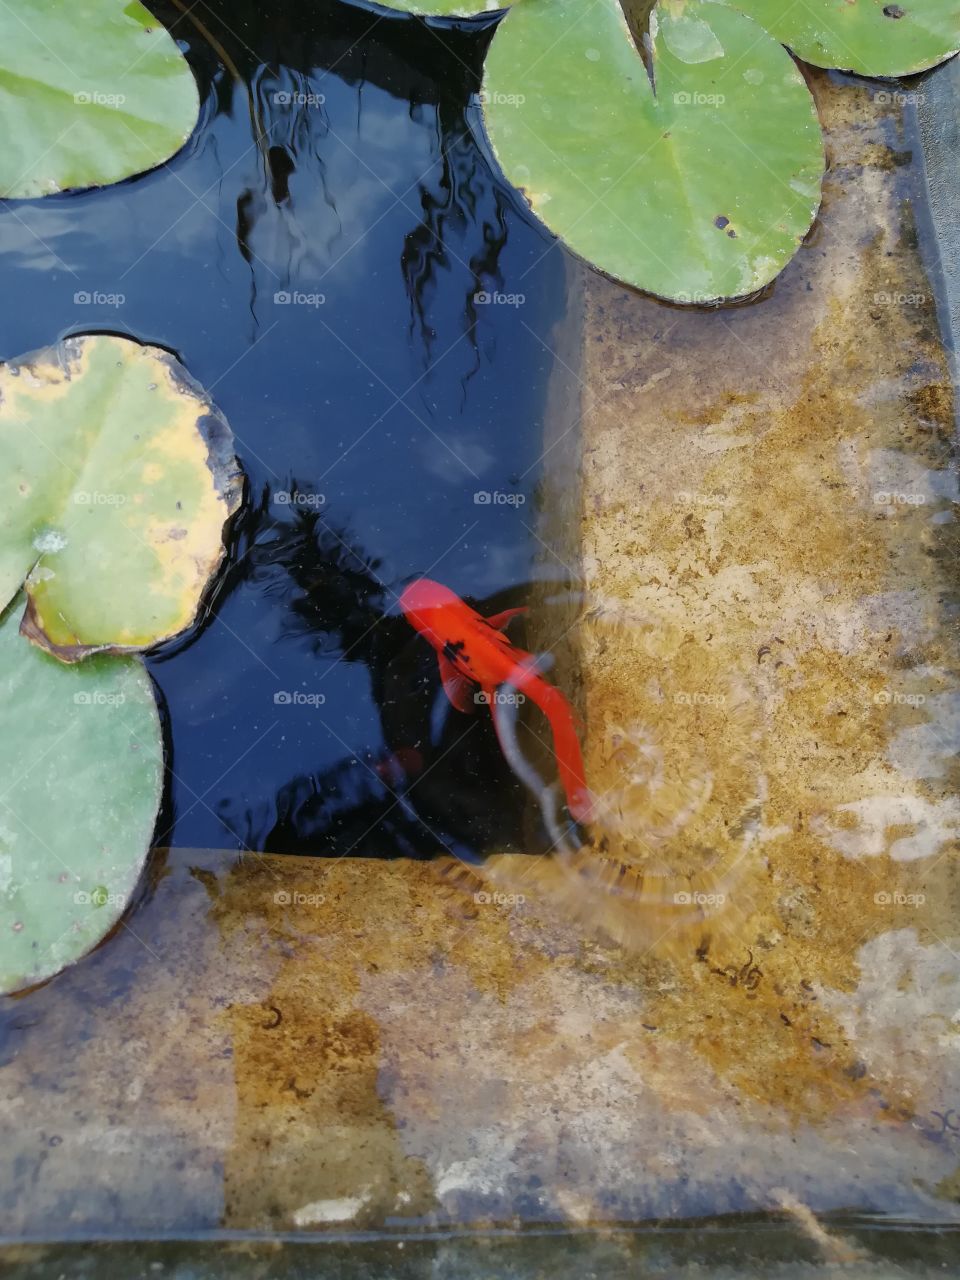 Japan in the pond